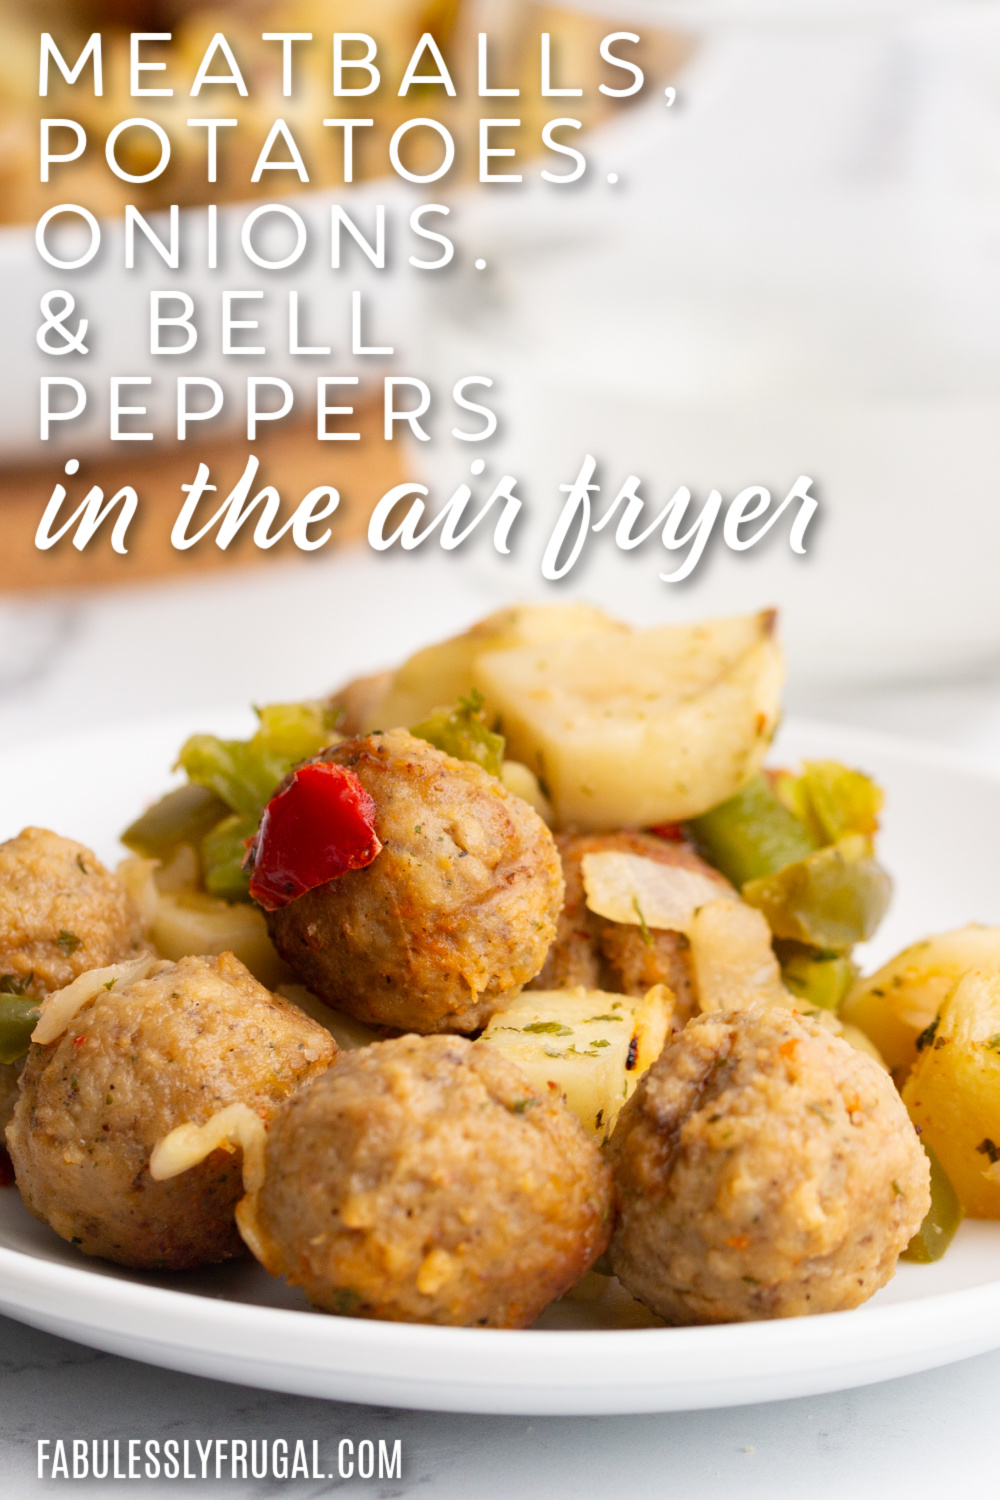 meatballs, potatoes, onions, and bell peppers in the air fryer pinterest image